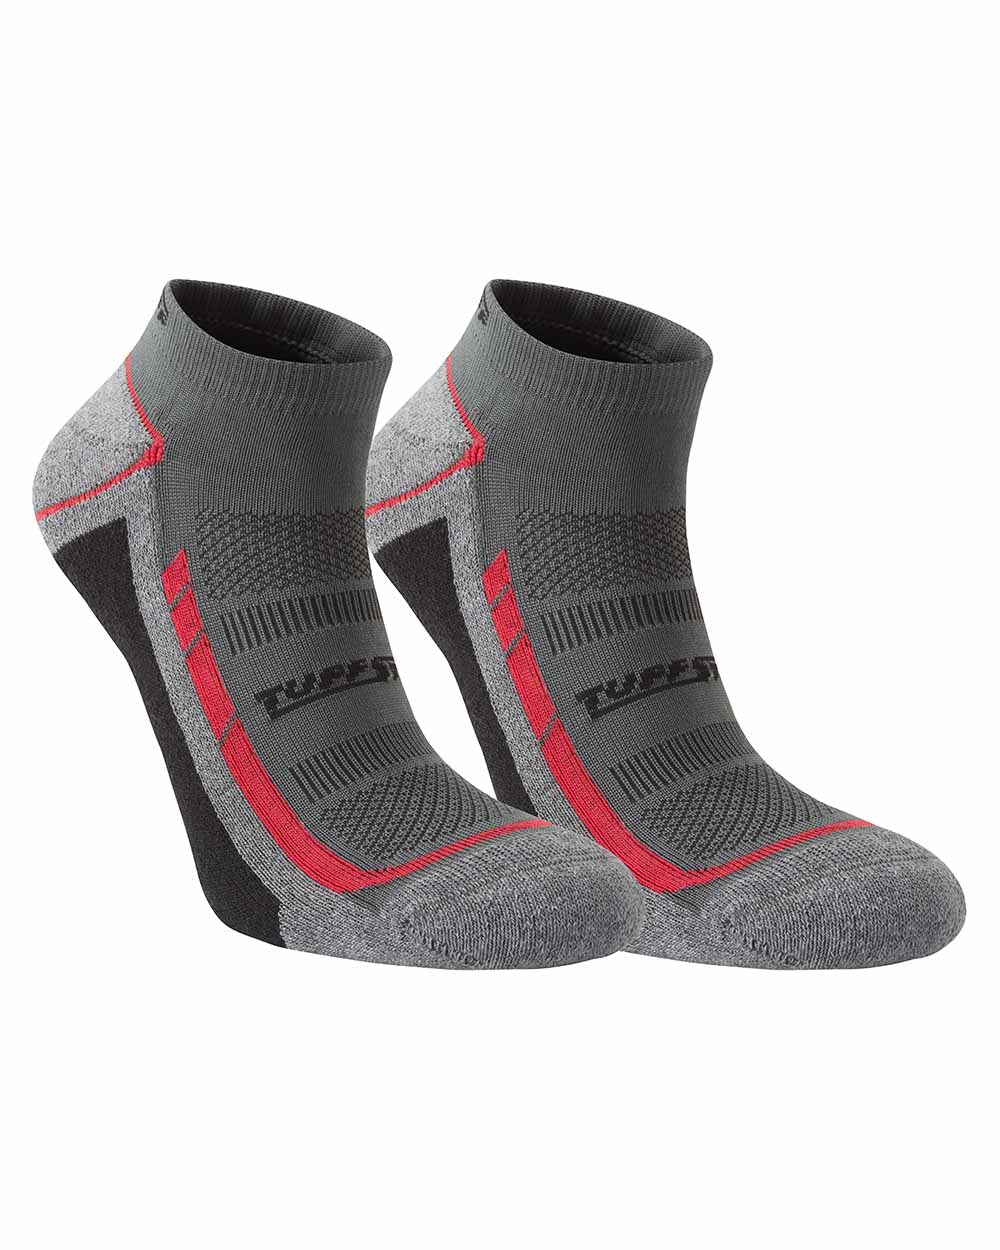 The TuffStuff Elite Low Cut Socks in Grey and Red